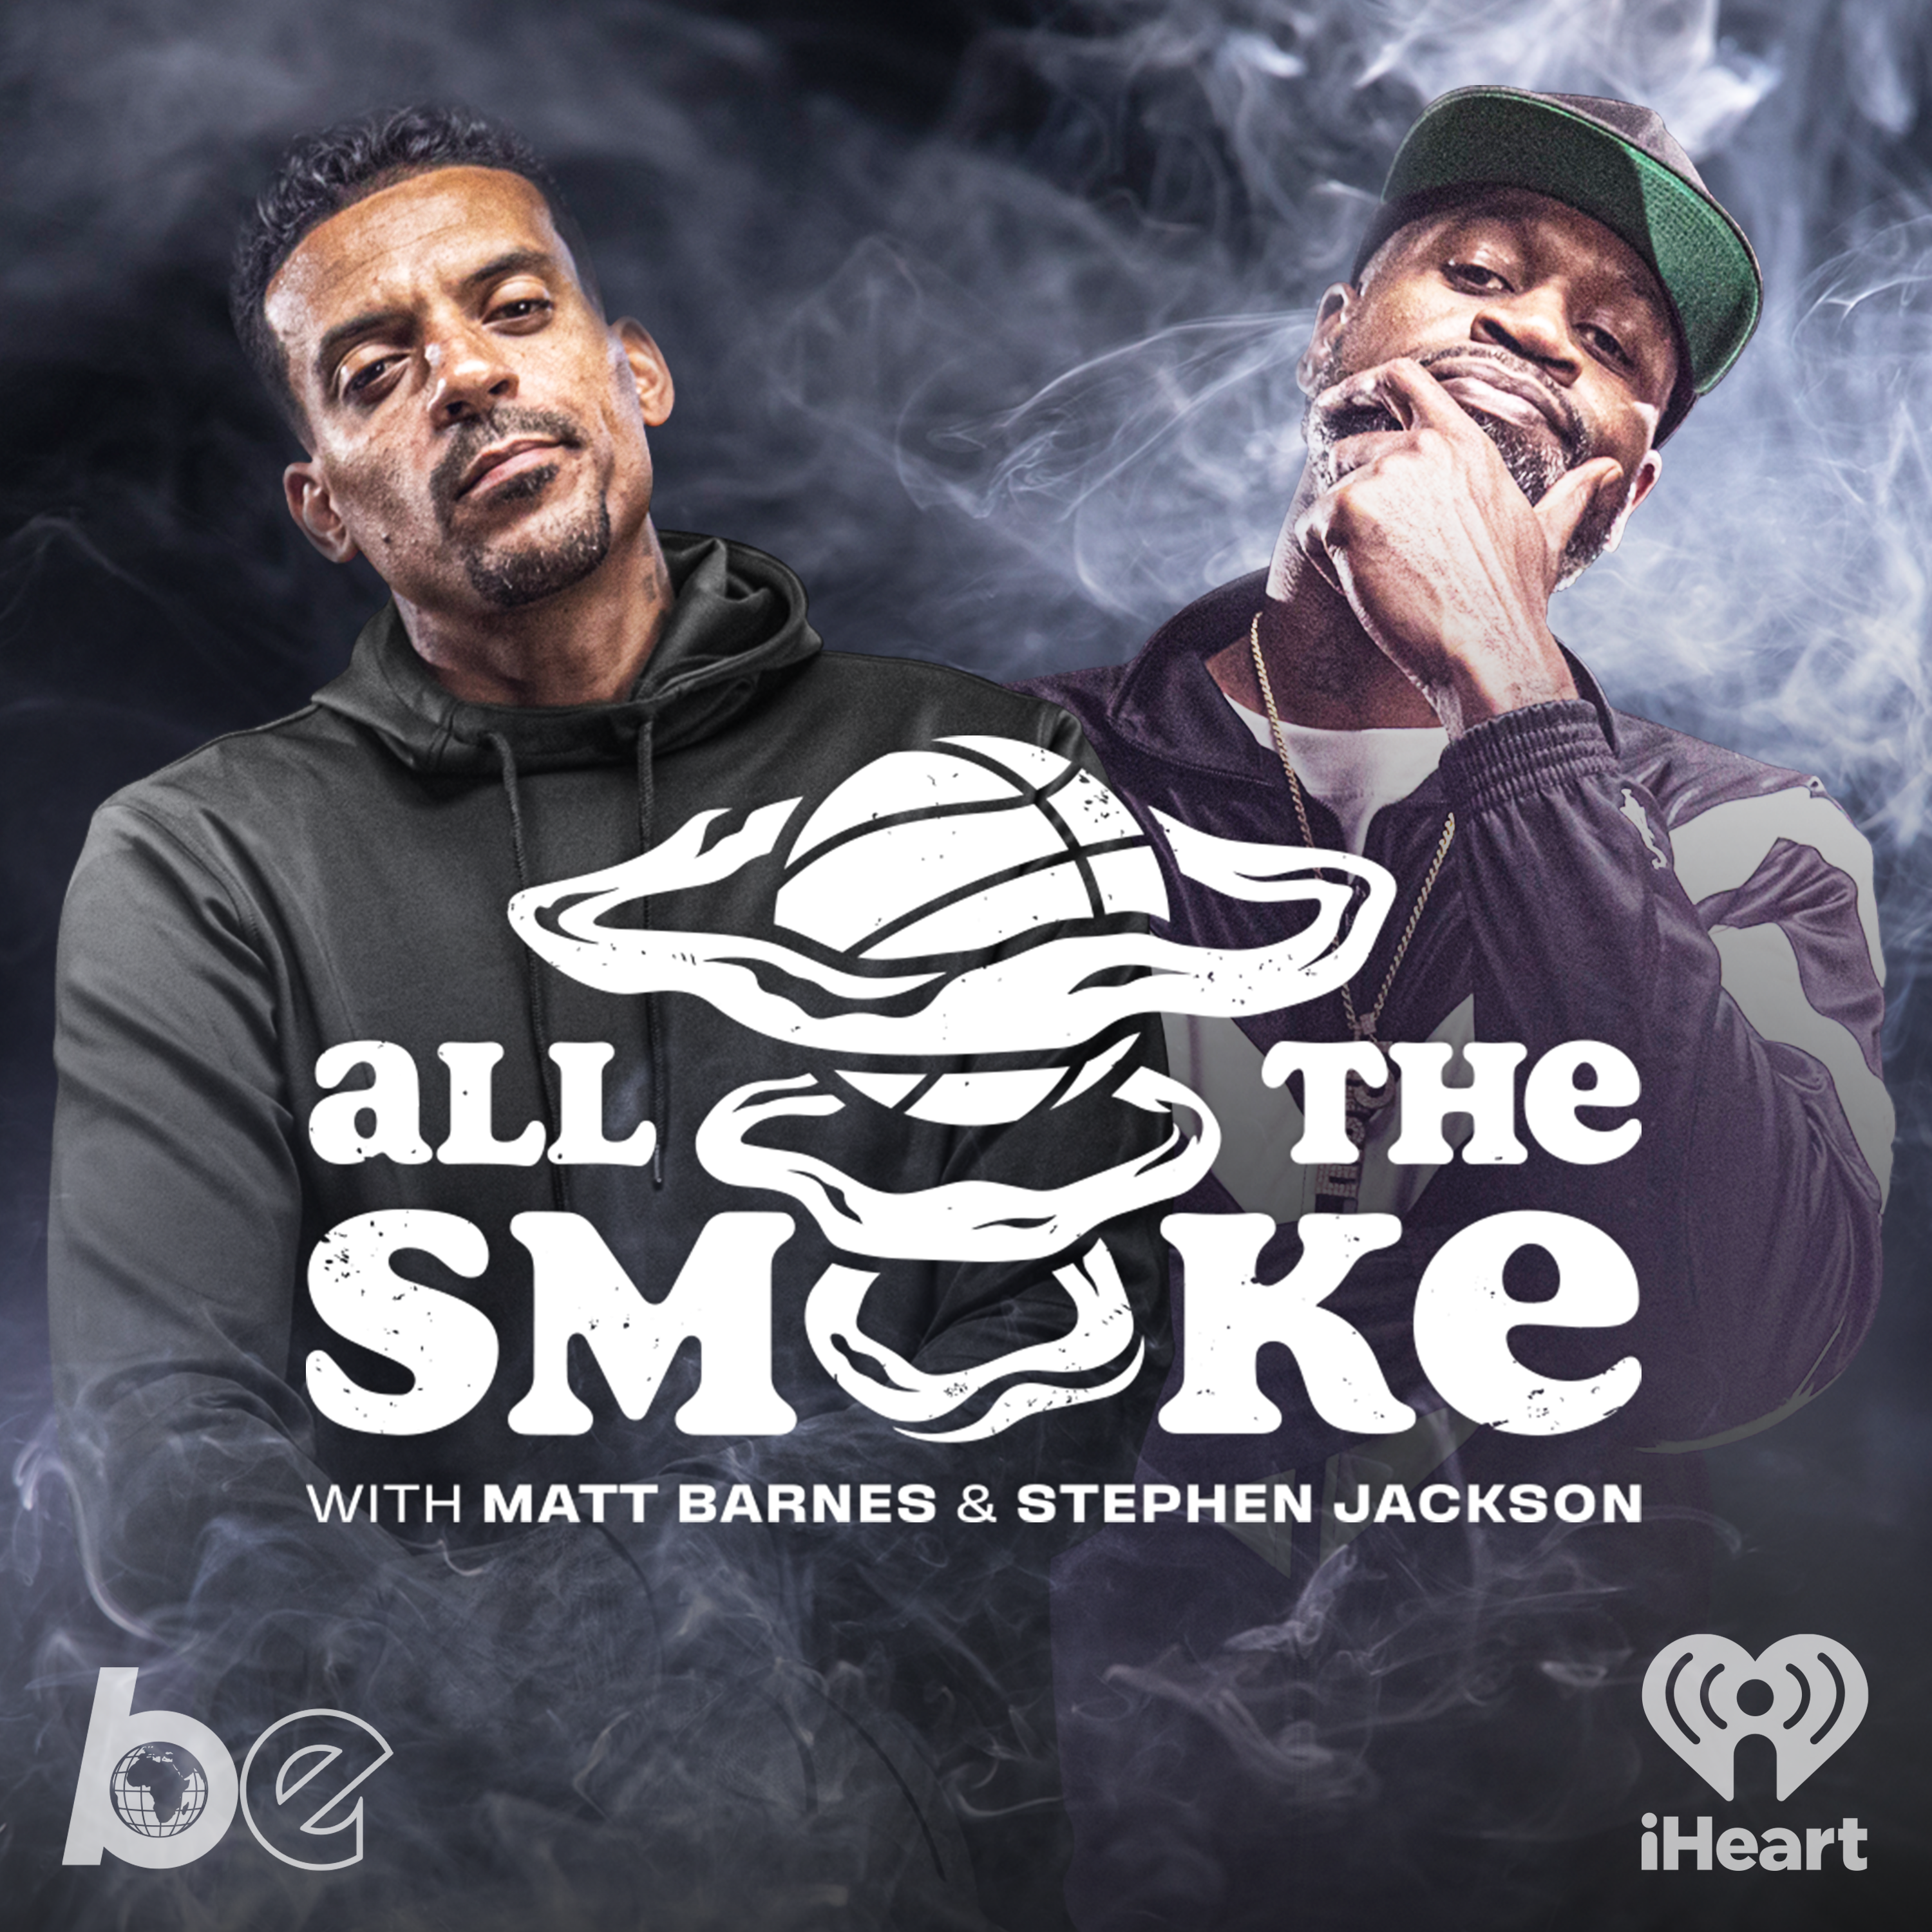 Chandler Parsons | Ep 125 | ALL THE SMOKE Full Episode | SHOWTIME Basketball